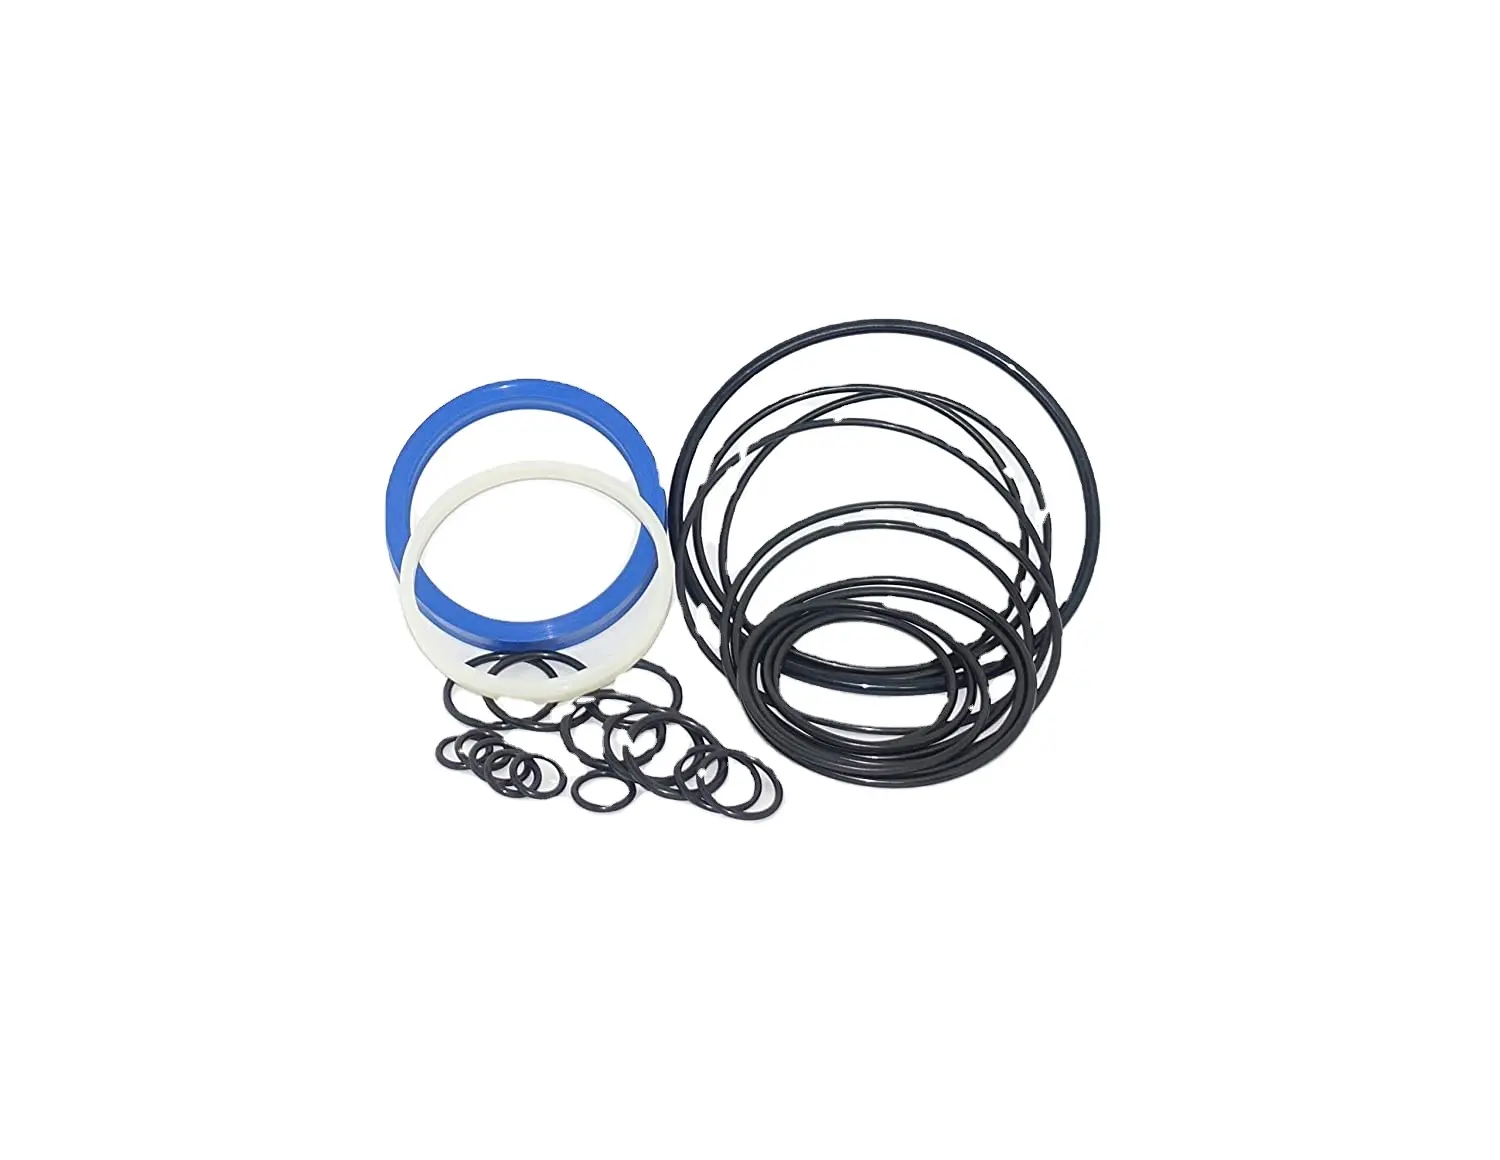 Hot selling hydraulic breaker spare parts seal kits with CE certificate